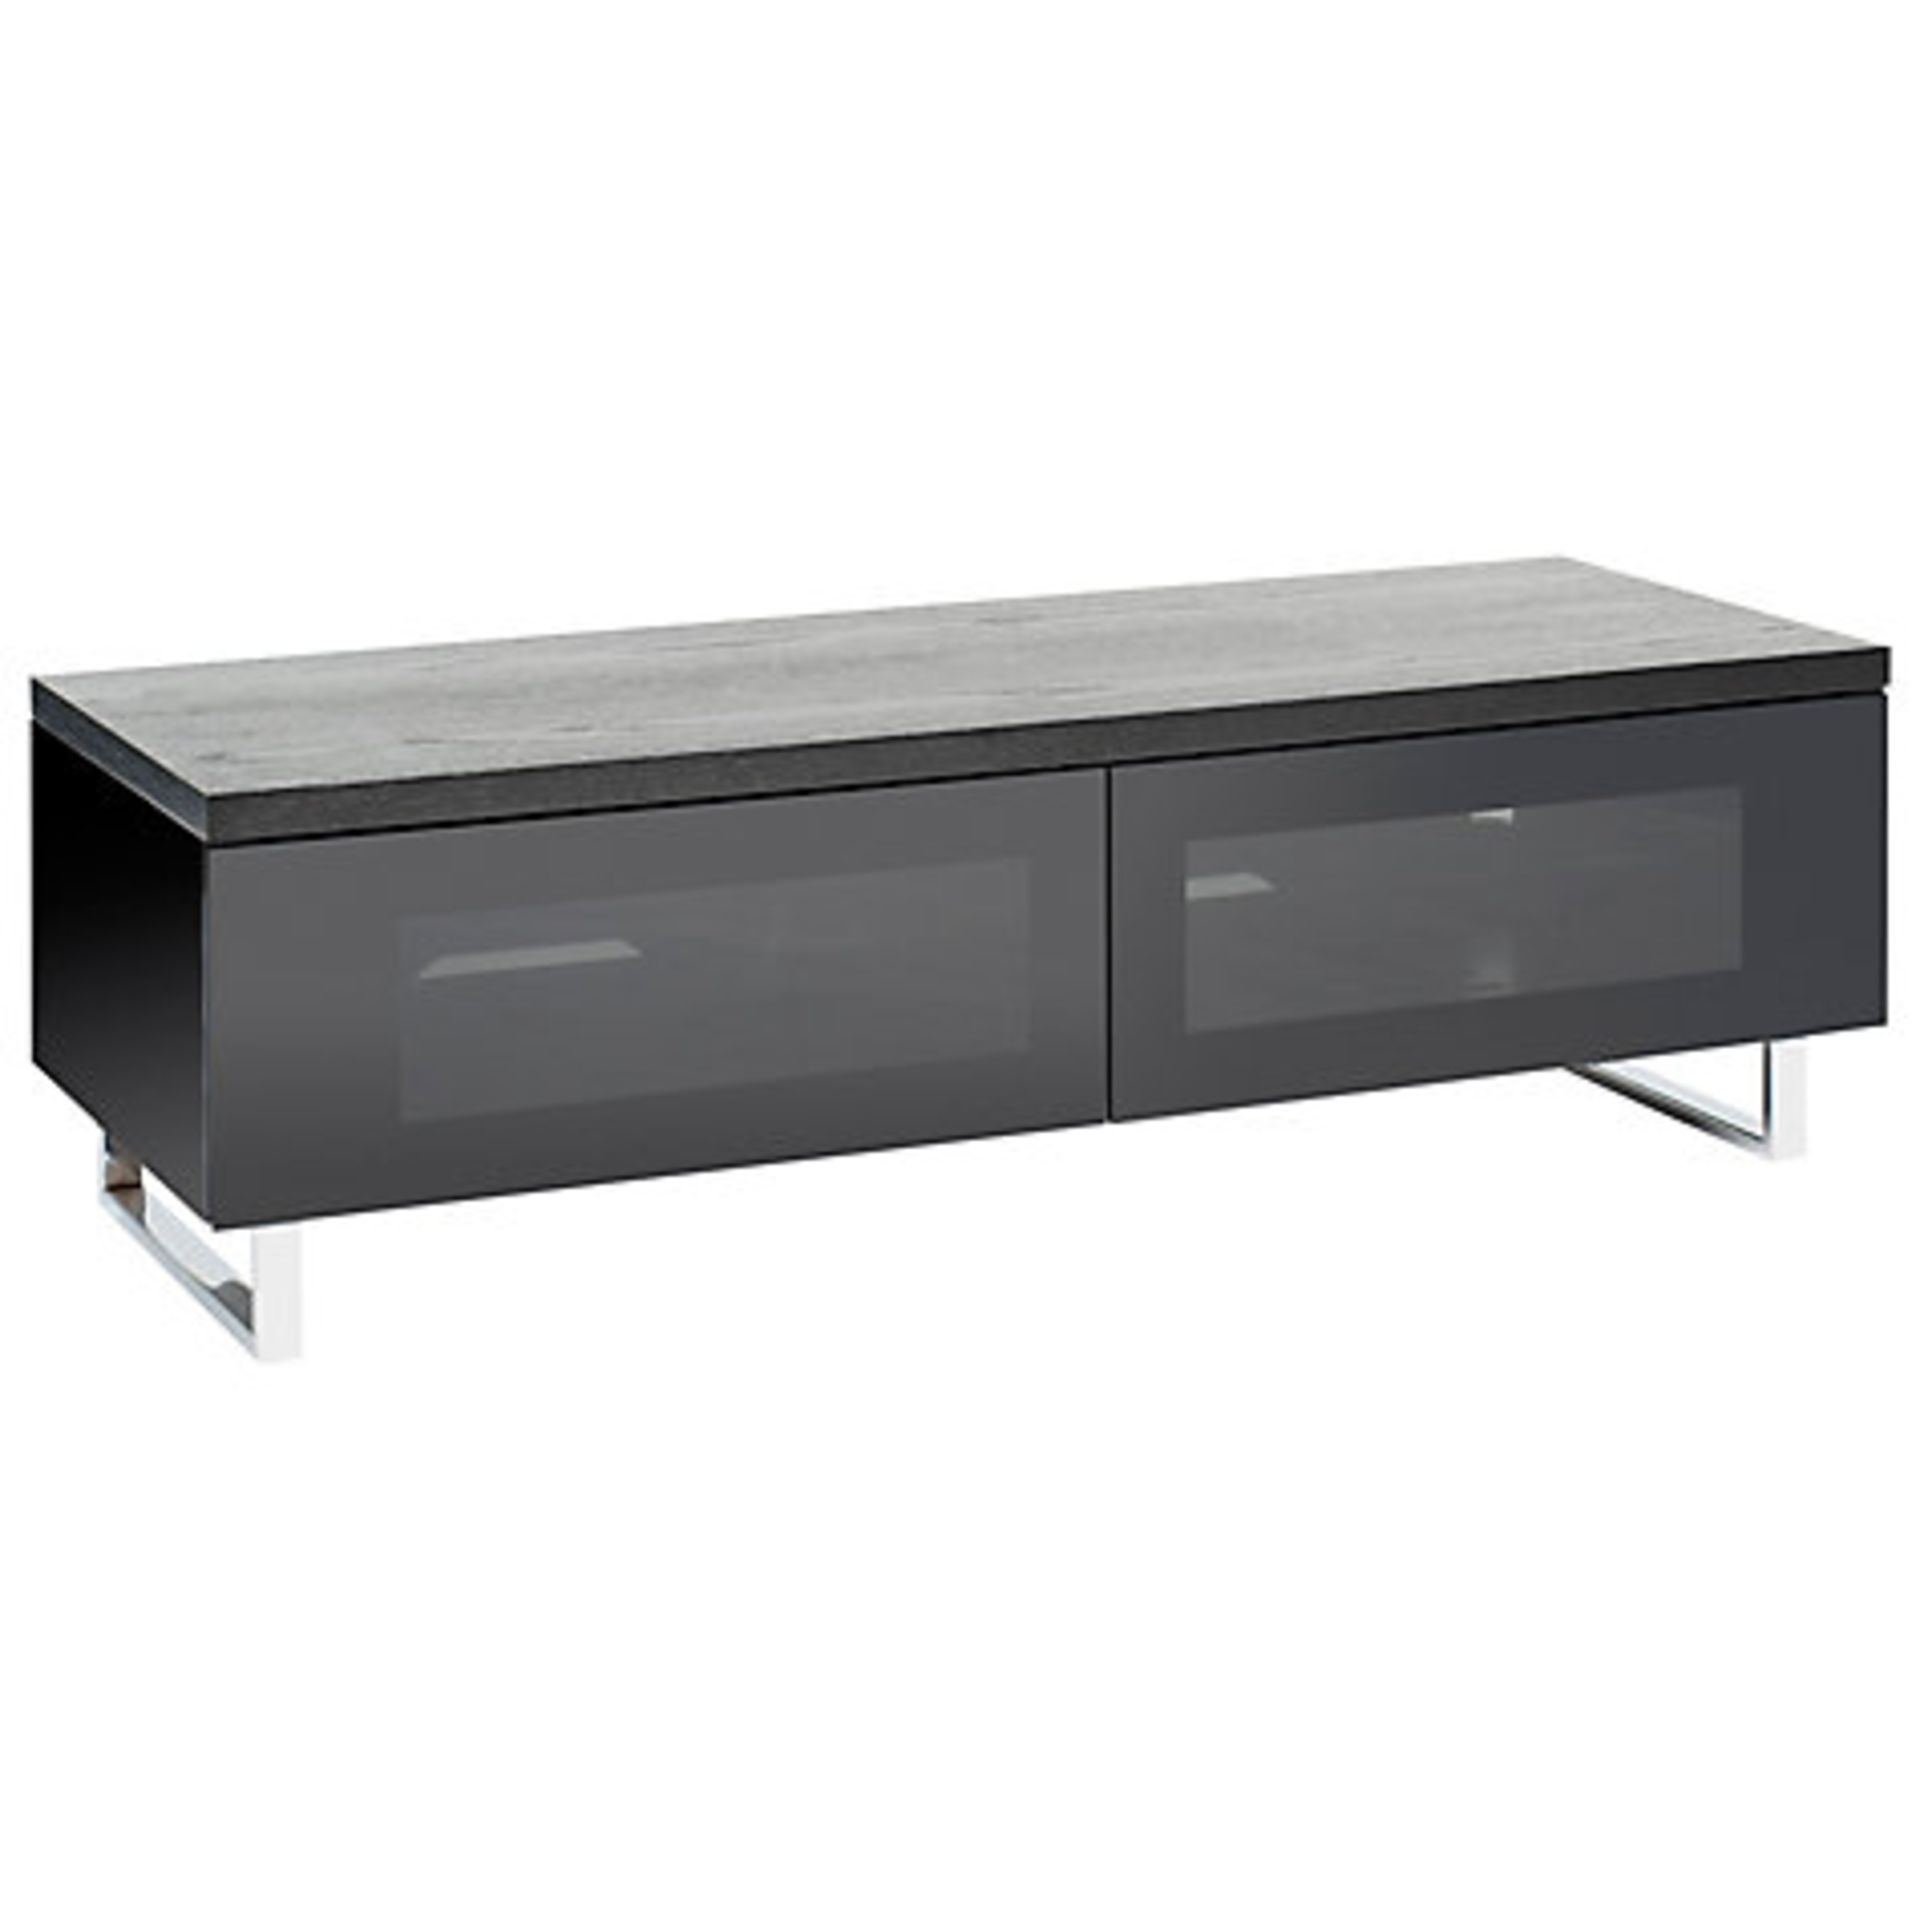 1 x TECHLINK TV STAND RRP£150   *PLEASE NOTE THAT THE BID PRICE IS MULTIPLIED BY THE NUMBER OF ITEMS